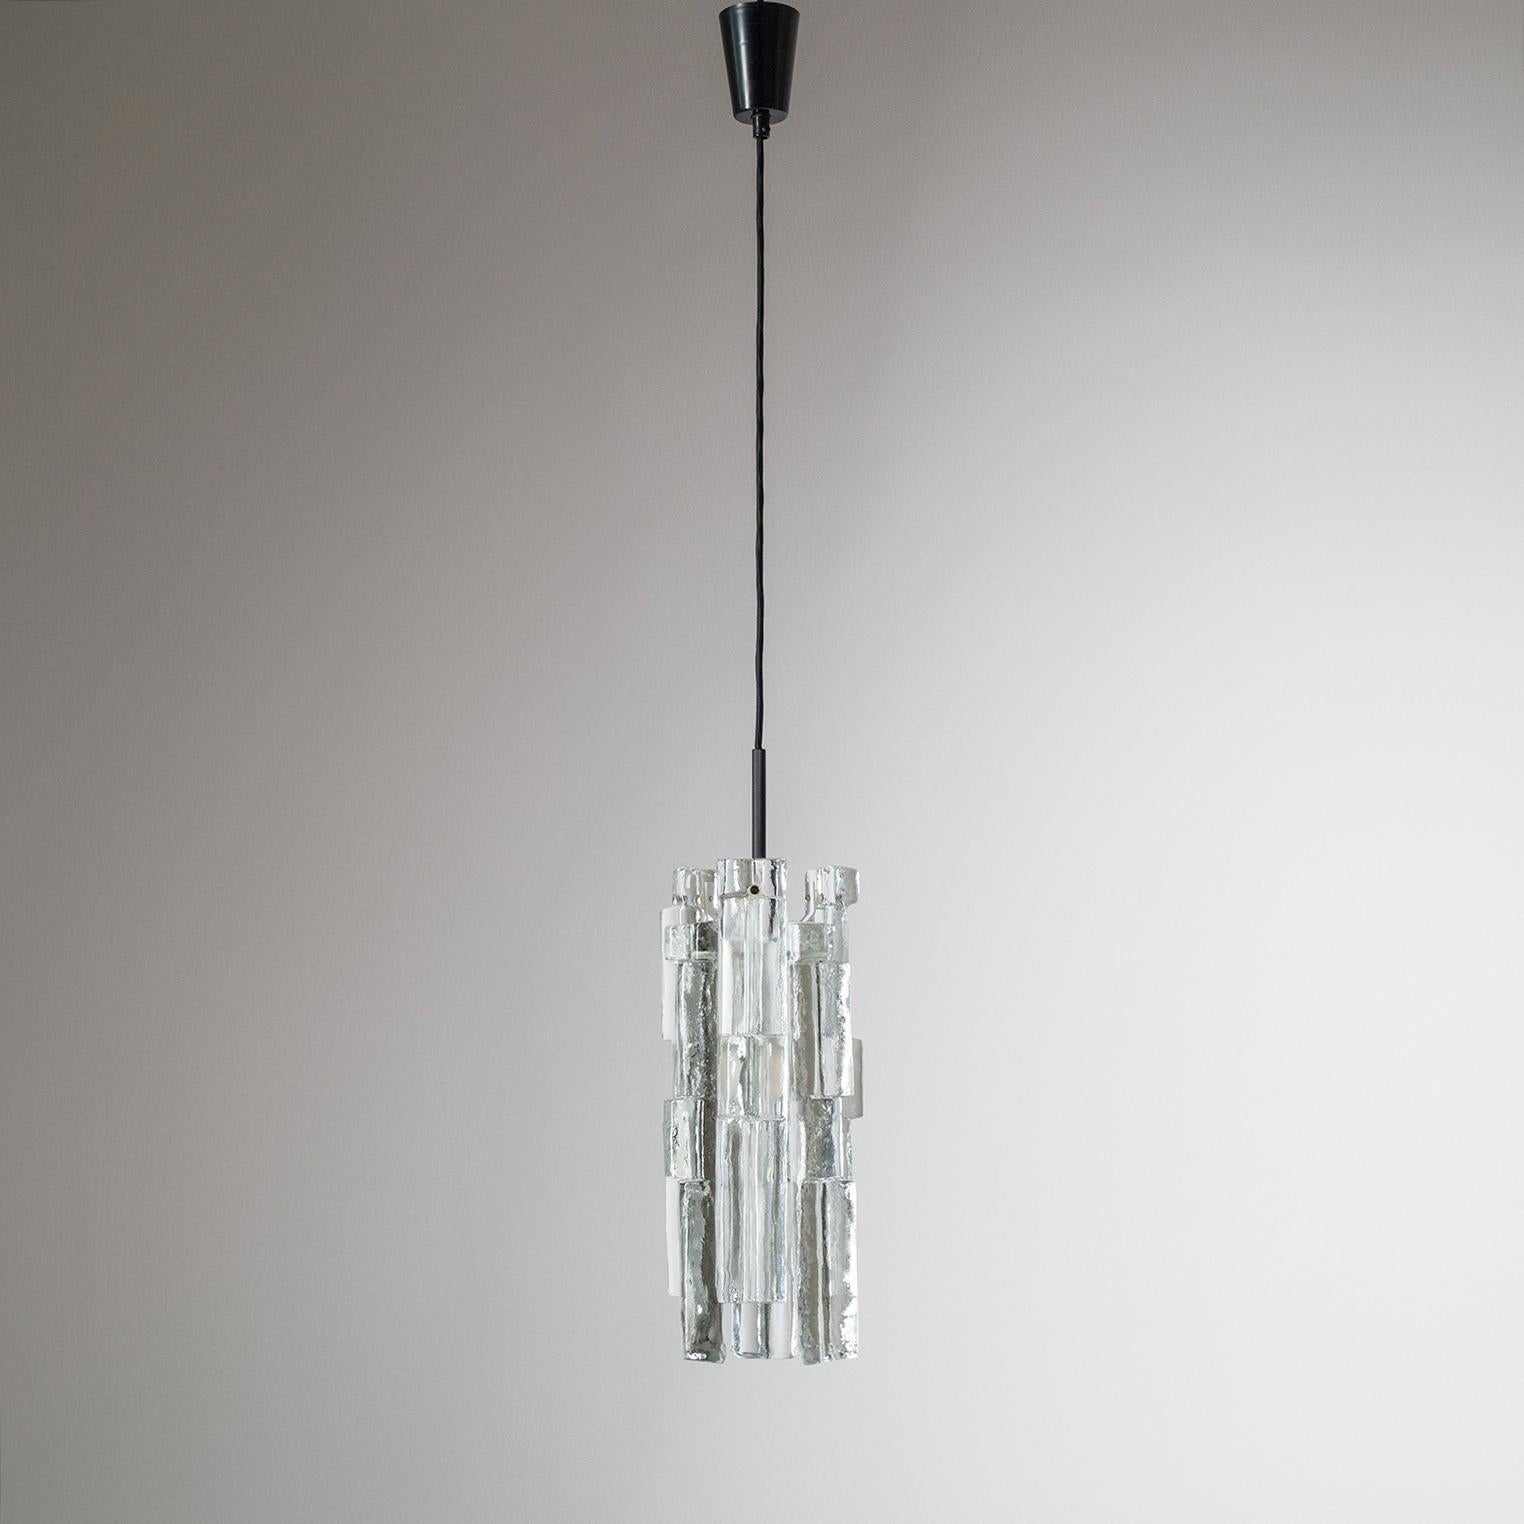 Exceptional Kalmar pendants from the 1960-1970s. Each pendant consists of six heavily textured Brutalist glass 'blocks' that are mounted around an E27 socket (60W). The glass is clear, however due to its thickness and heavy texture it will catch the